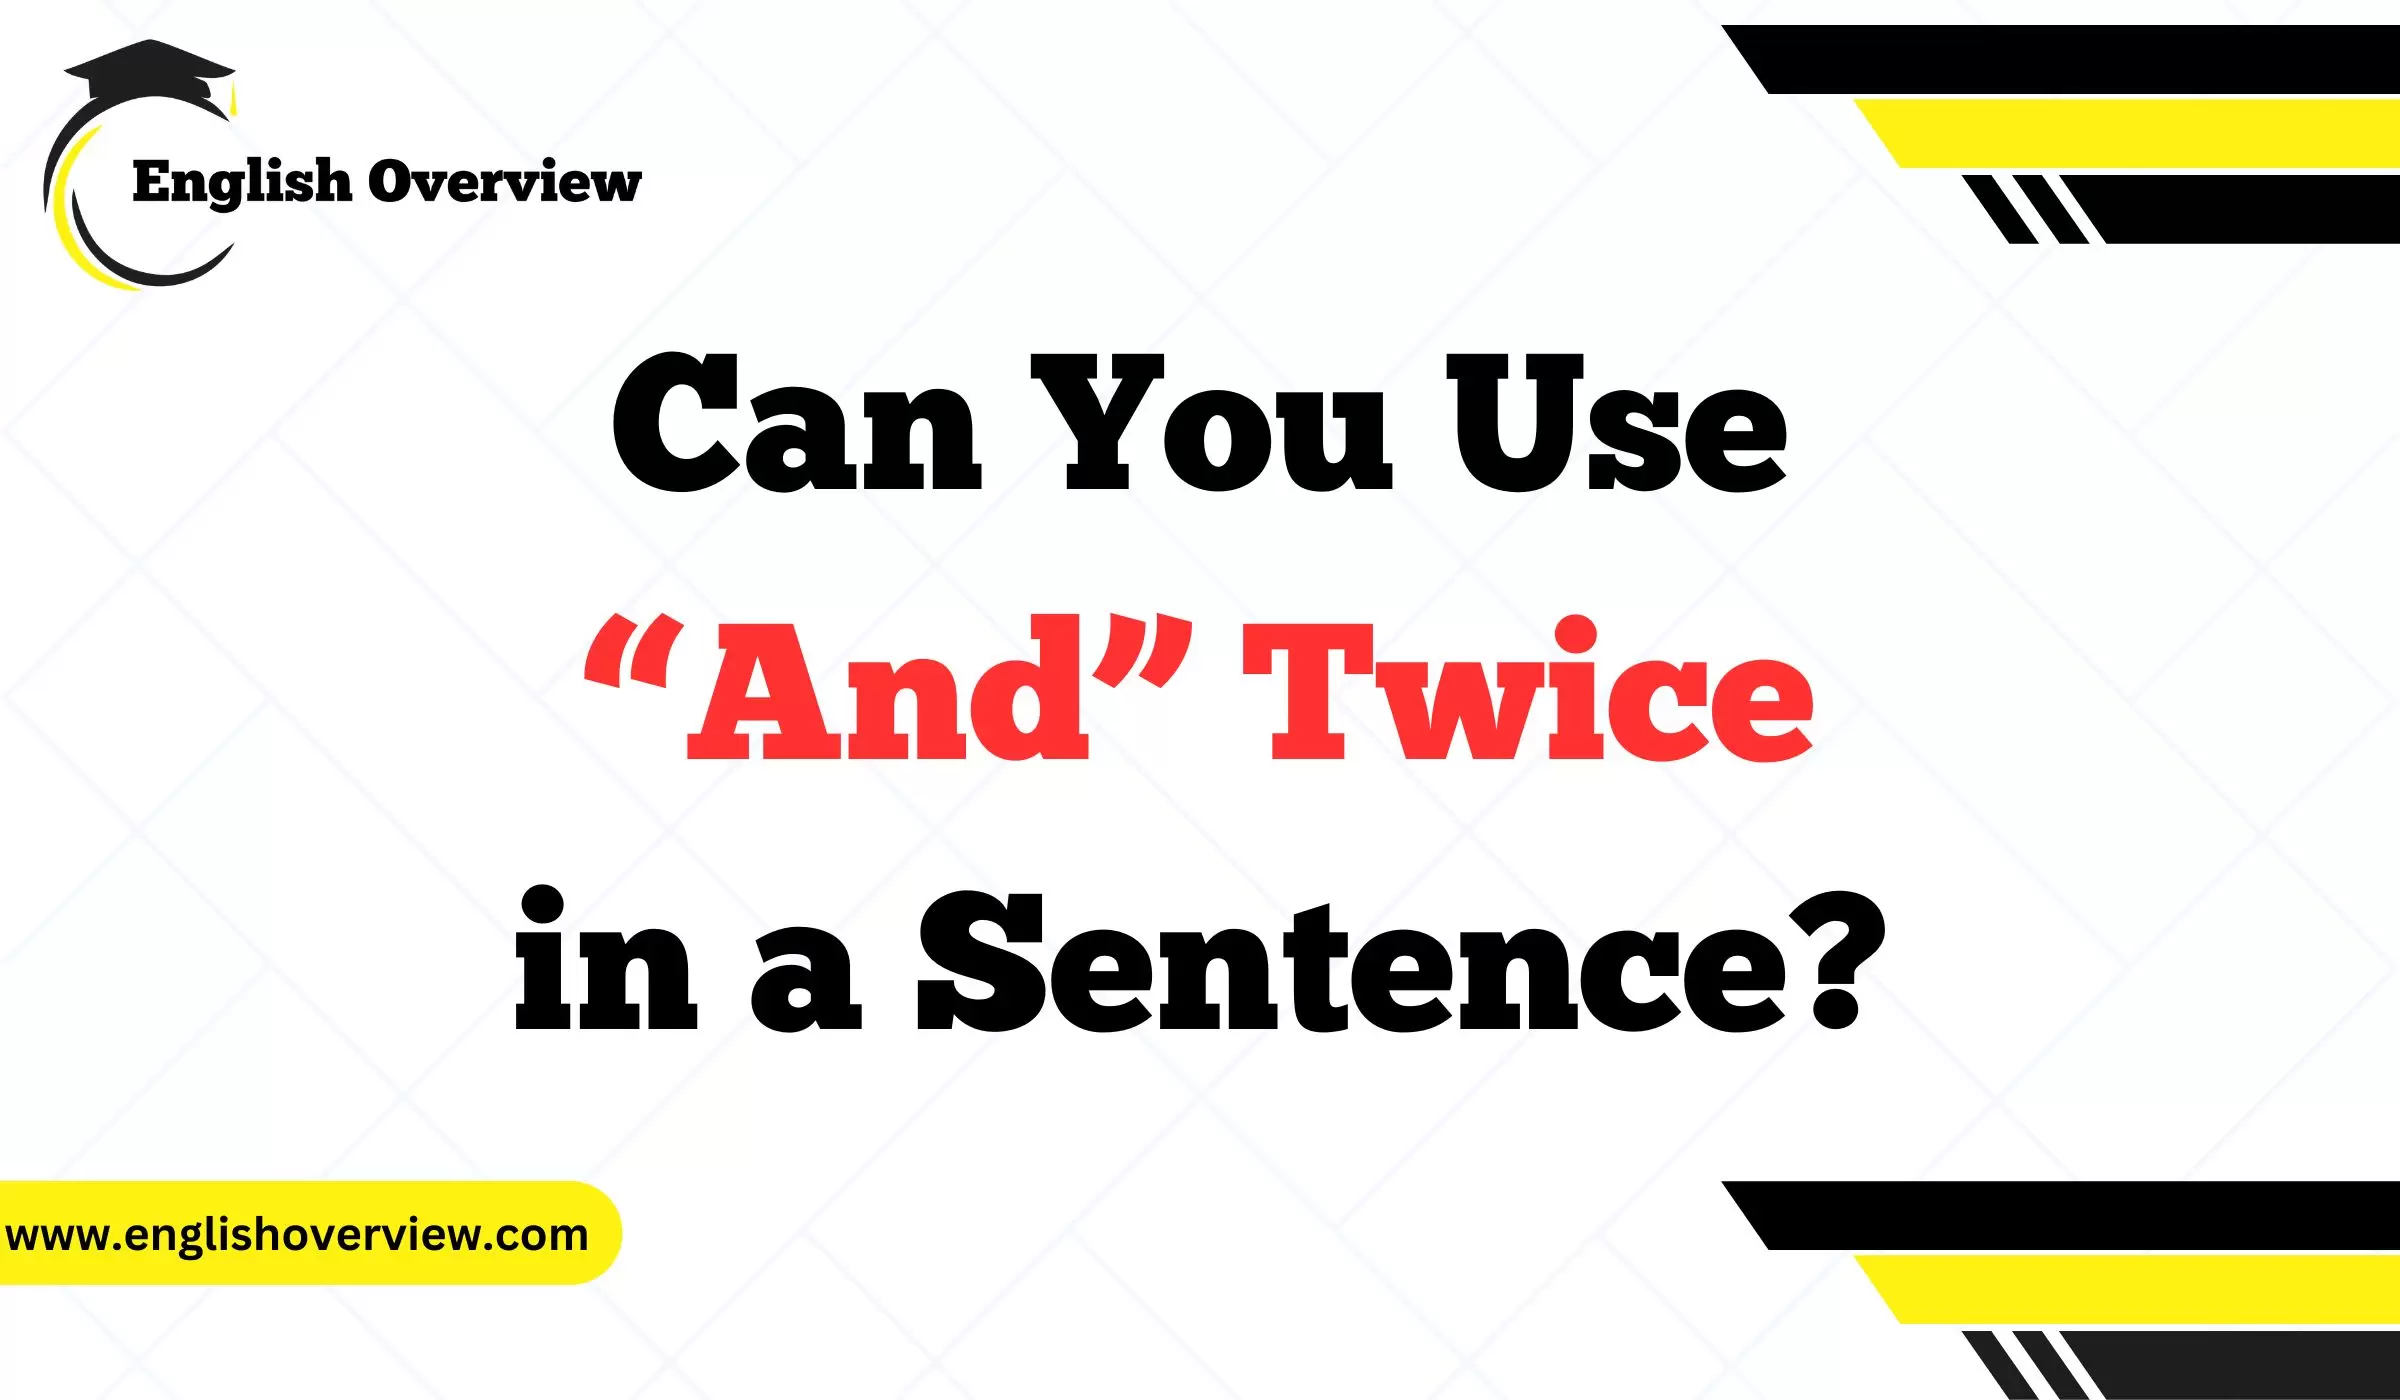 Can You Use “And” Twice in a Sentence